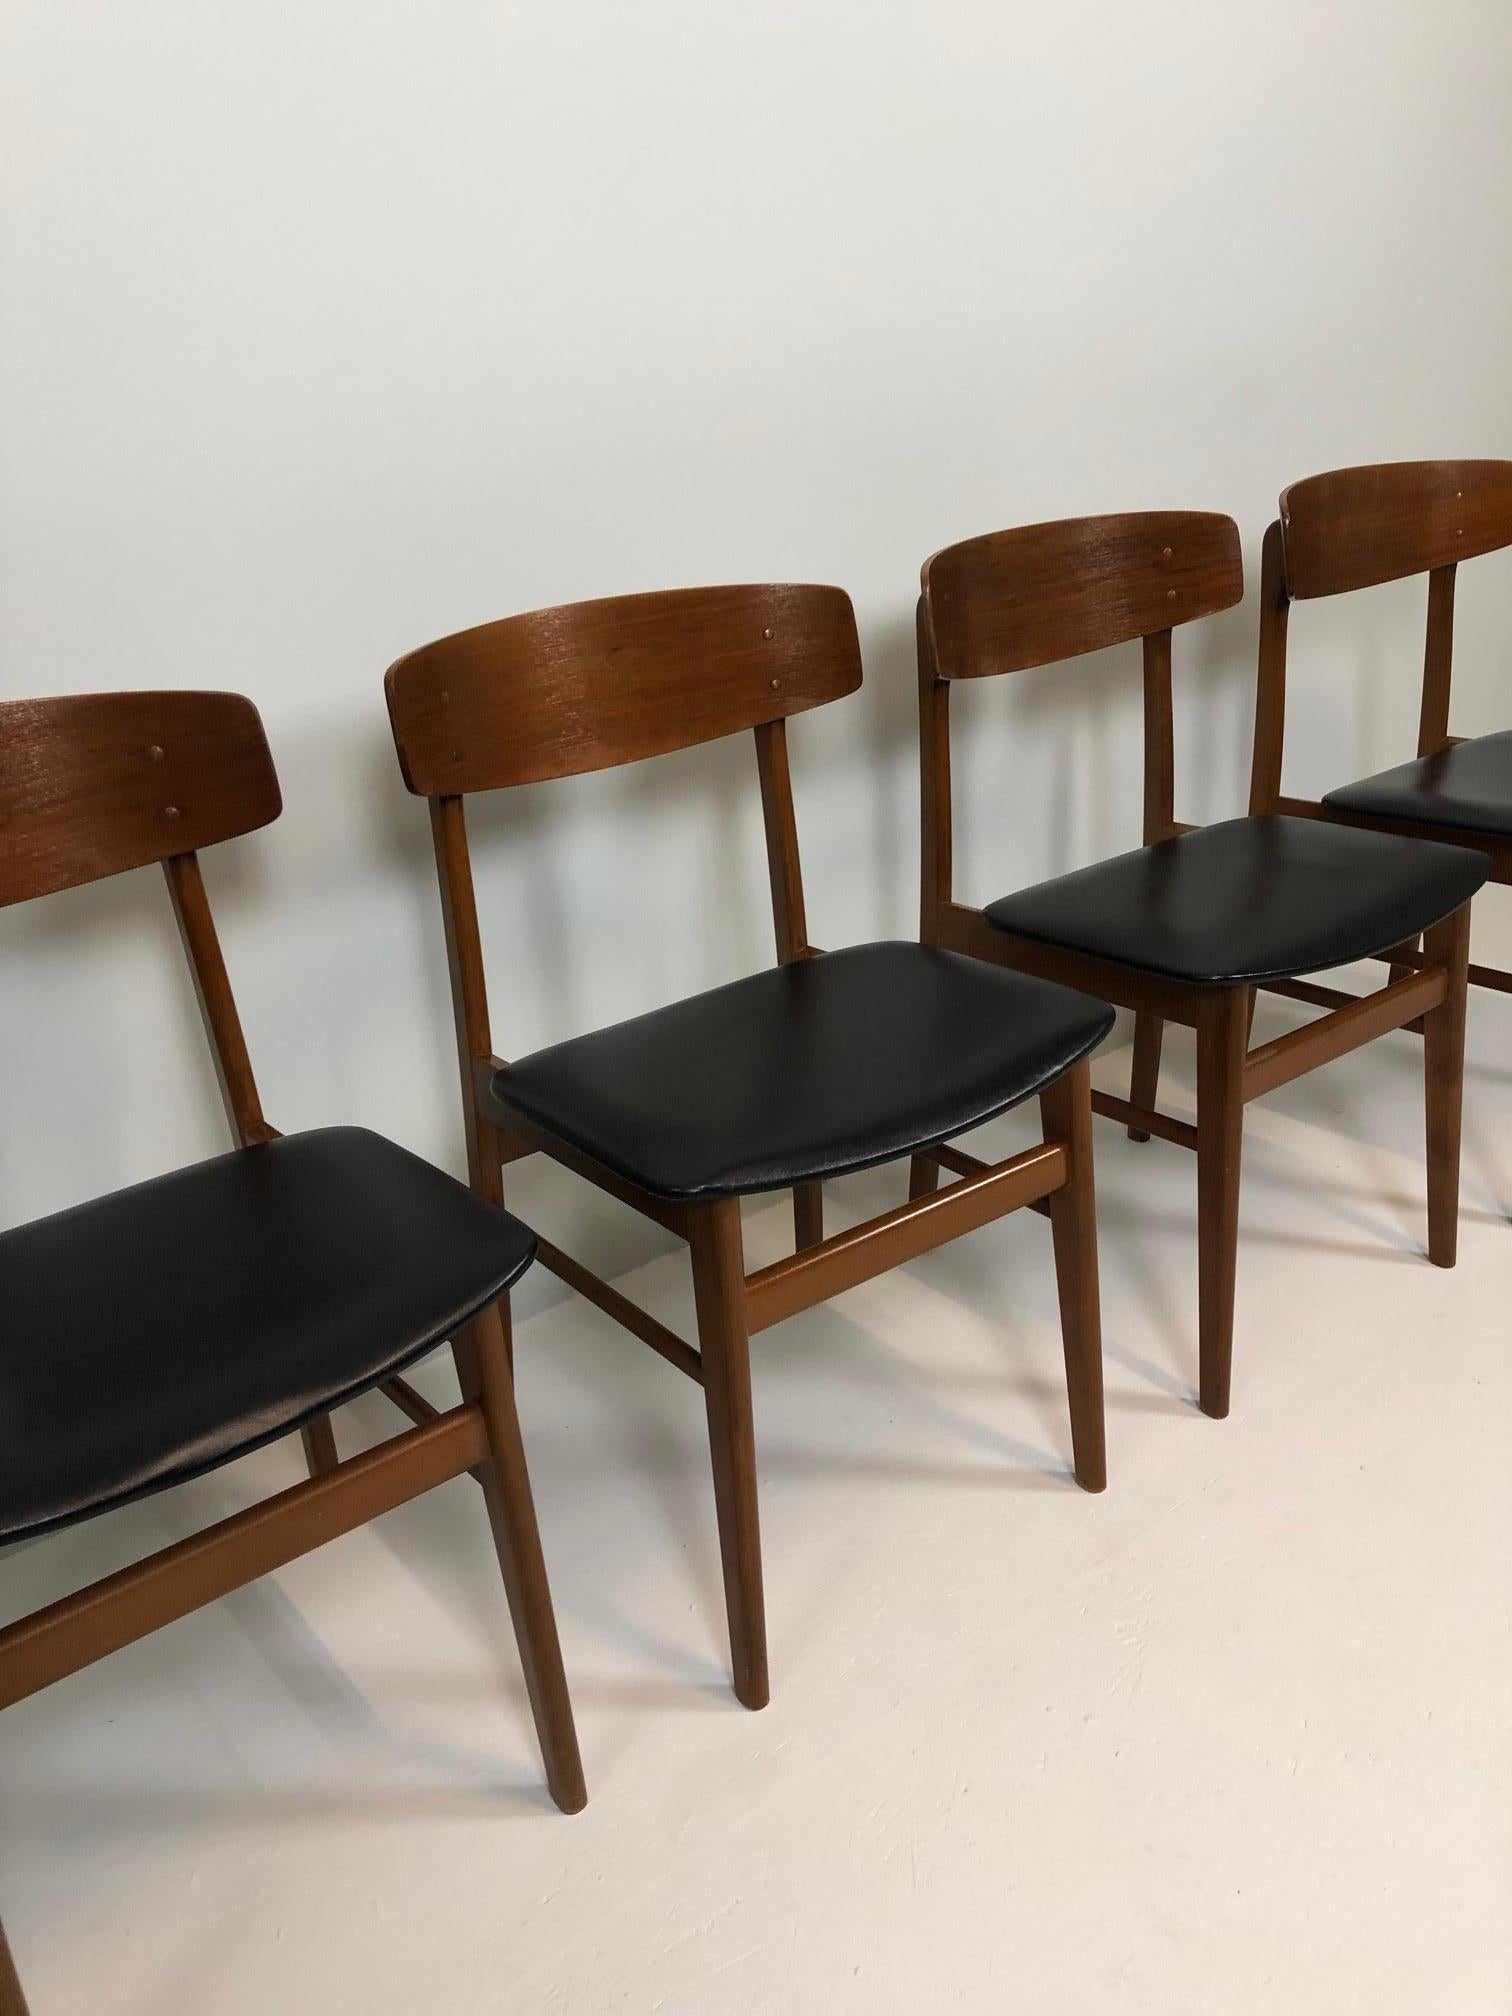 Set of four Sax chairs, made in Denmark, 1960, teakwood base, seat in black imitation leather.